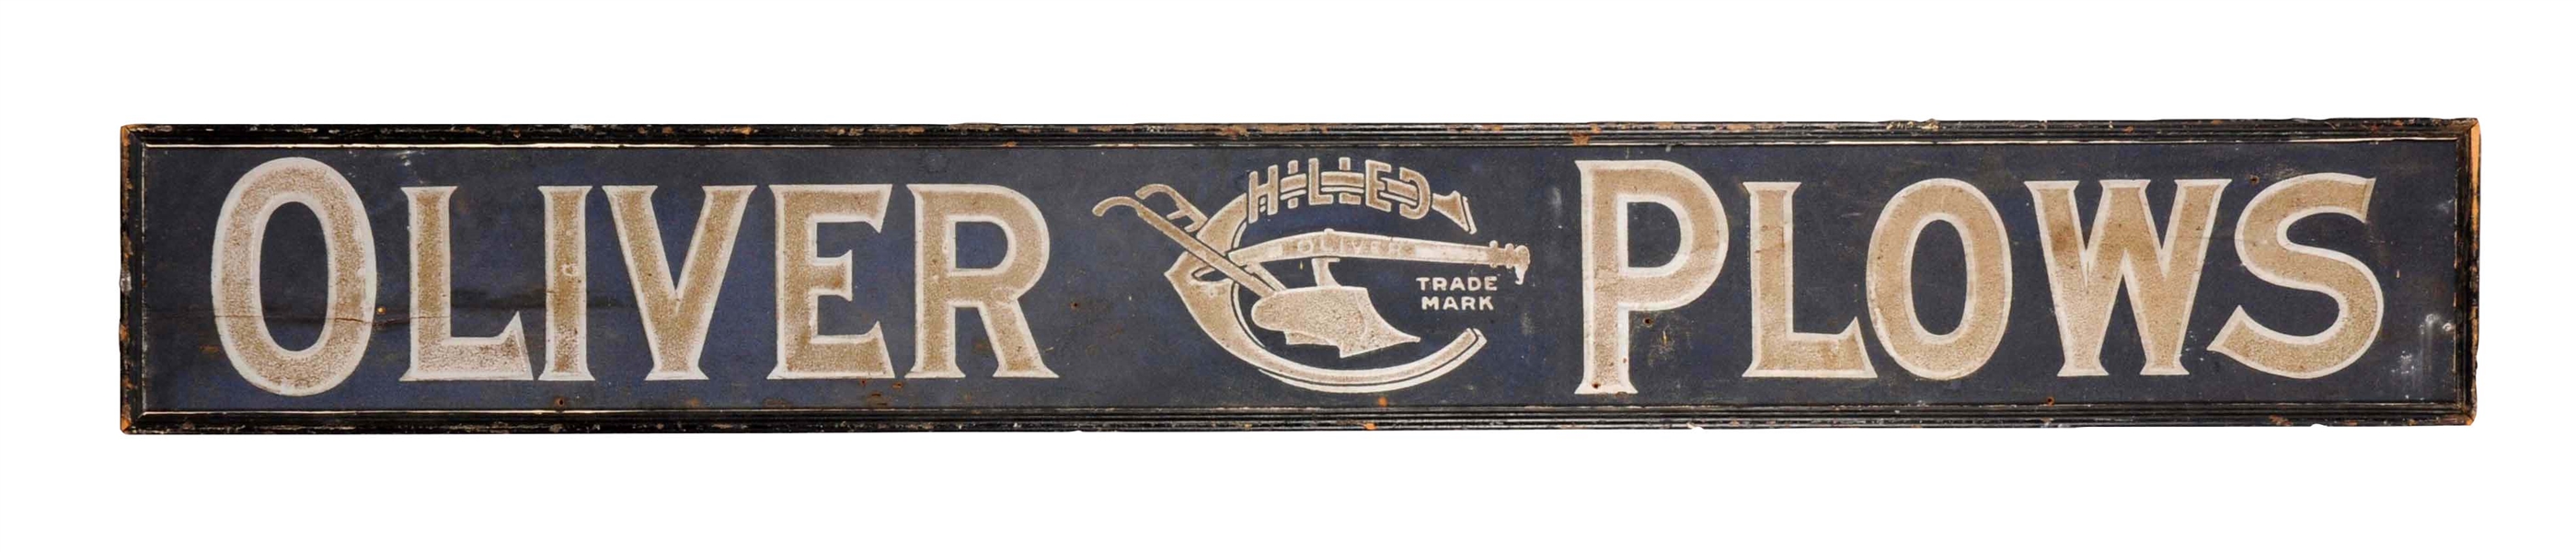 OLIVER CHILLED PLOWS WOODEN ADVERTISING TRADE SIGN. 